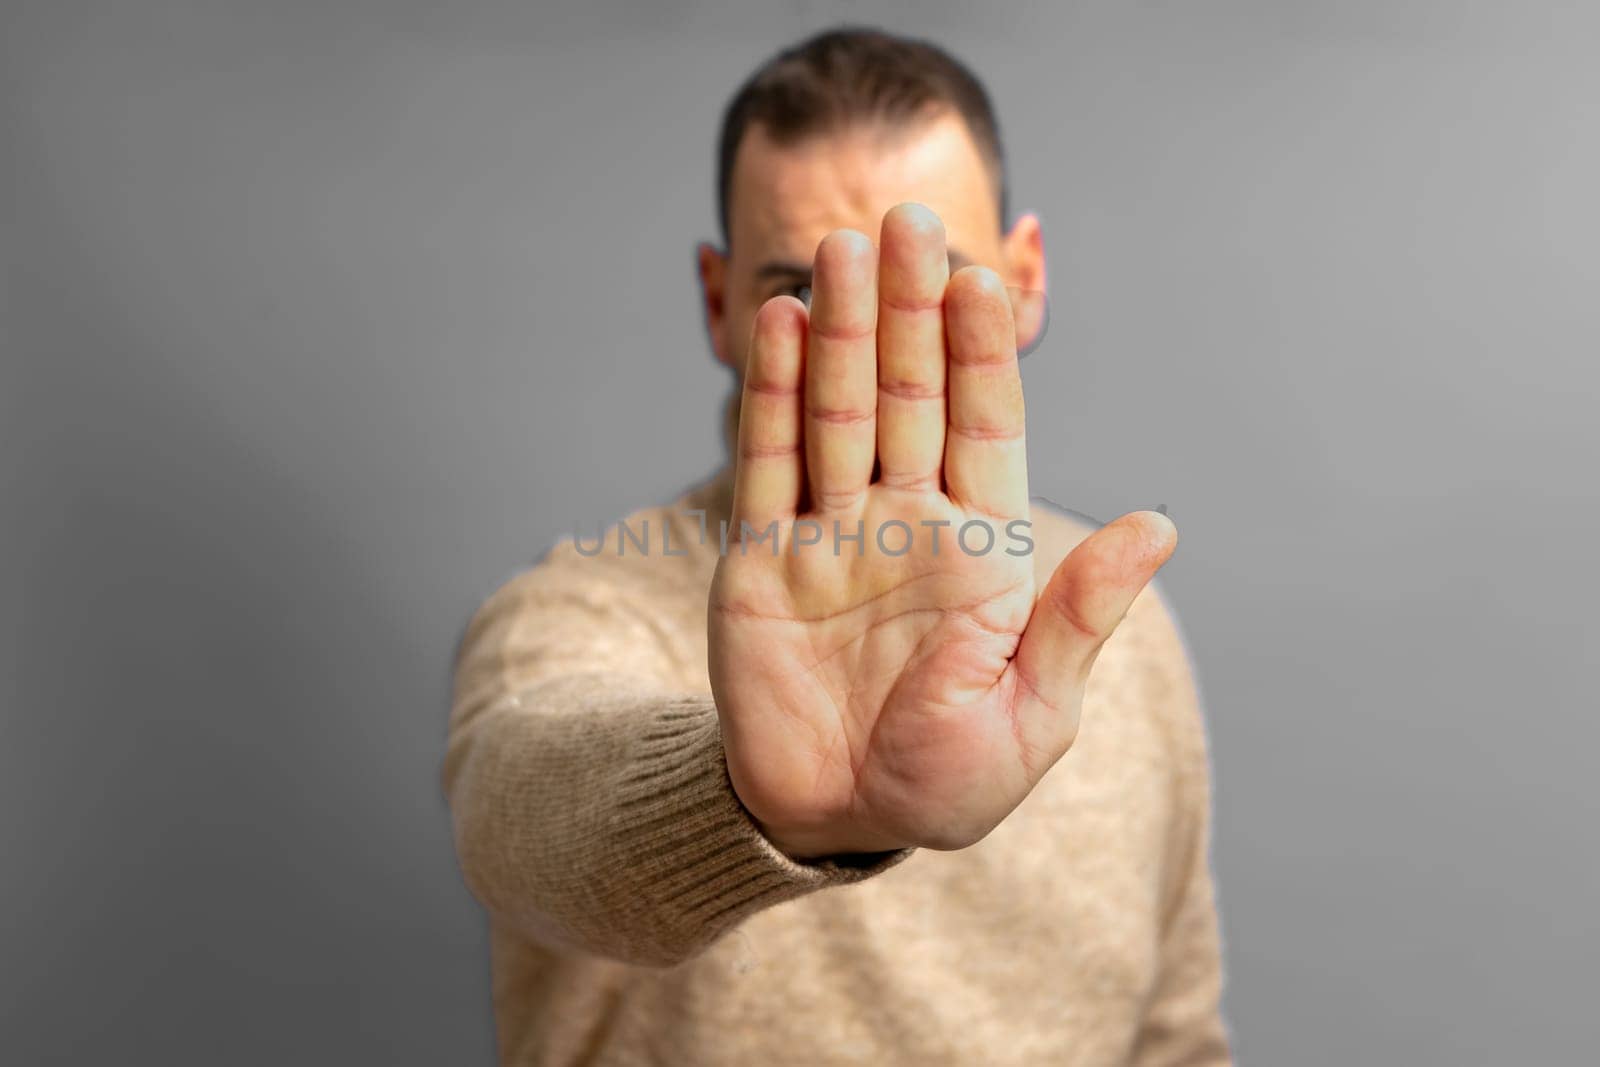 Hispanic man showing hands and palm lines forward with blurred body, man demonstrating hand strength. Concept of stop, strength, hands and DNA, five fingers on the hand